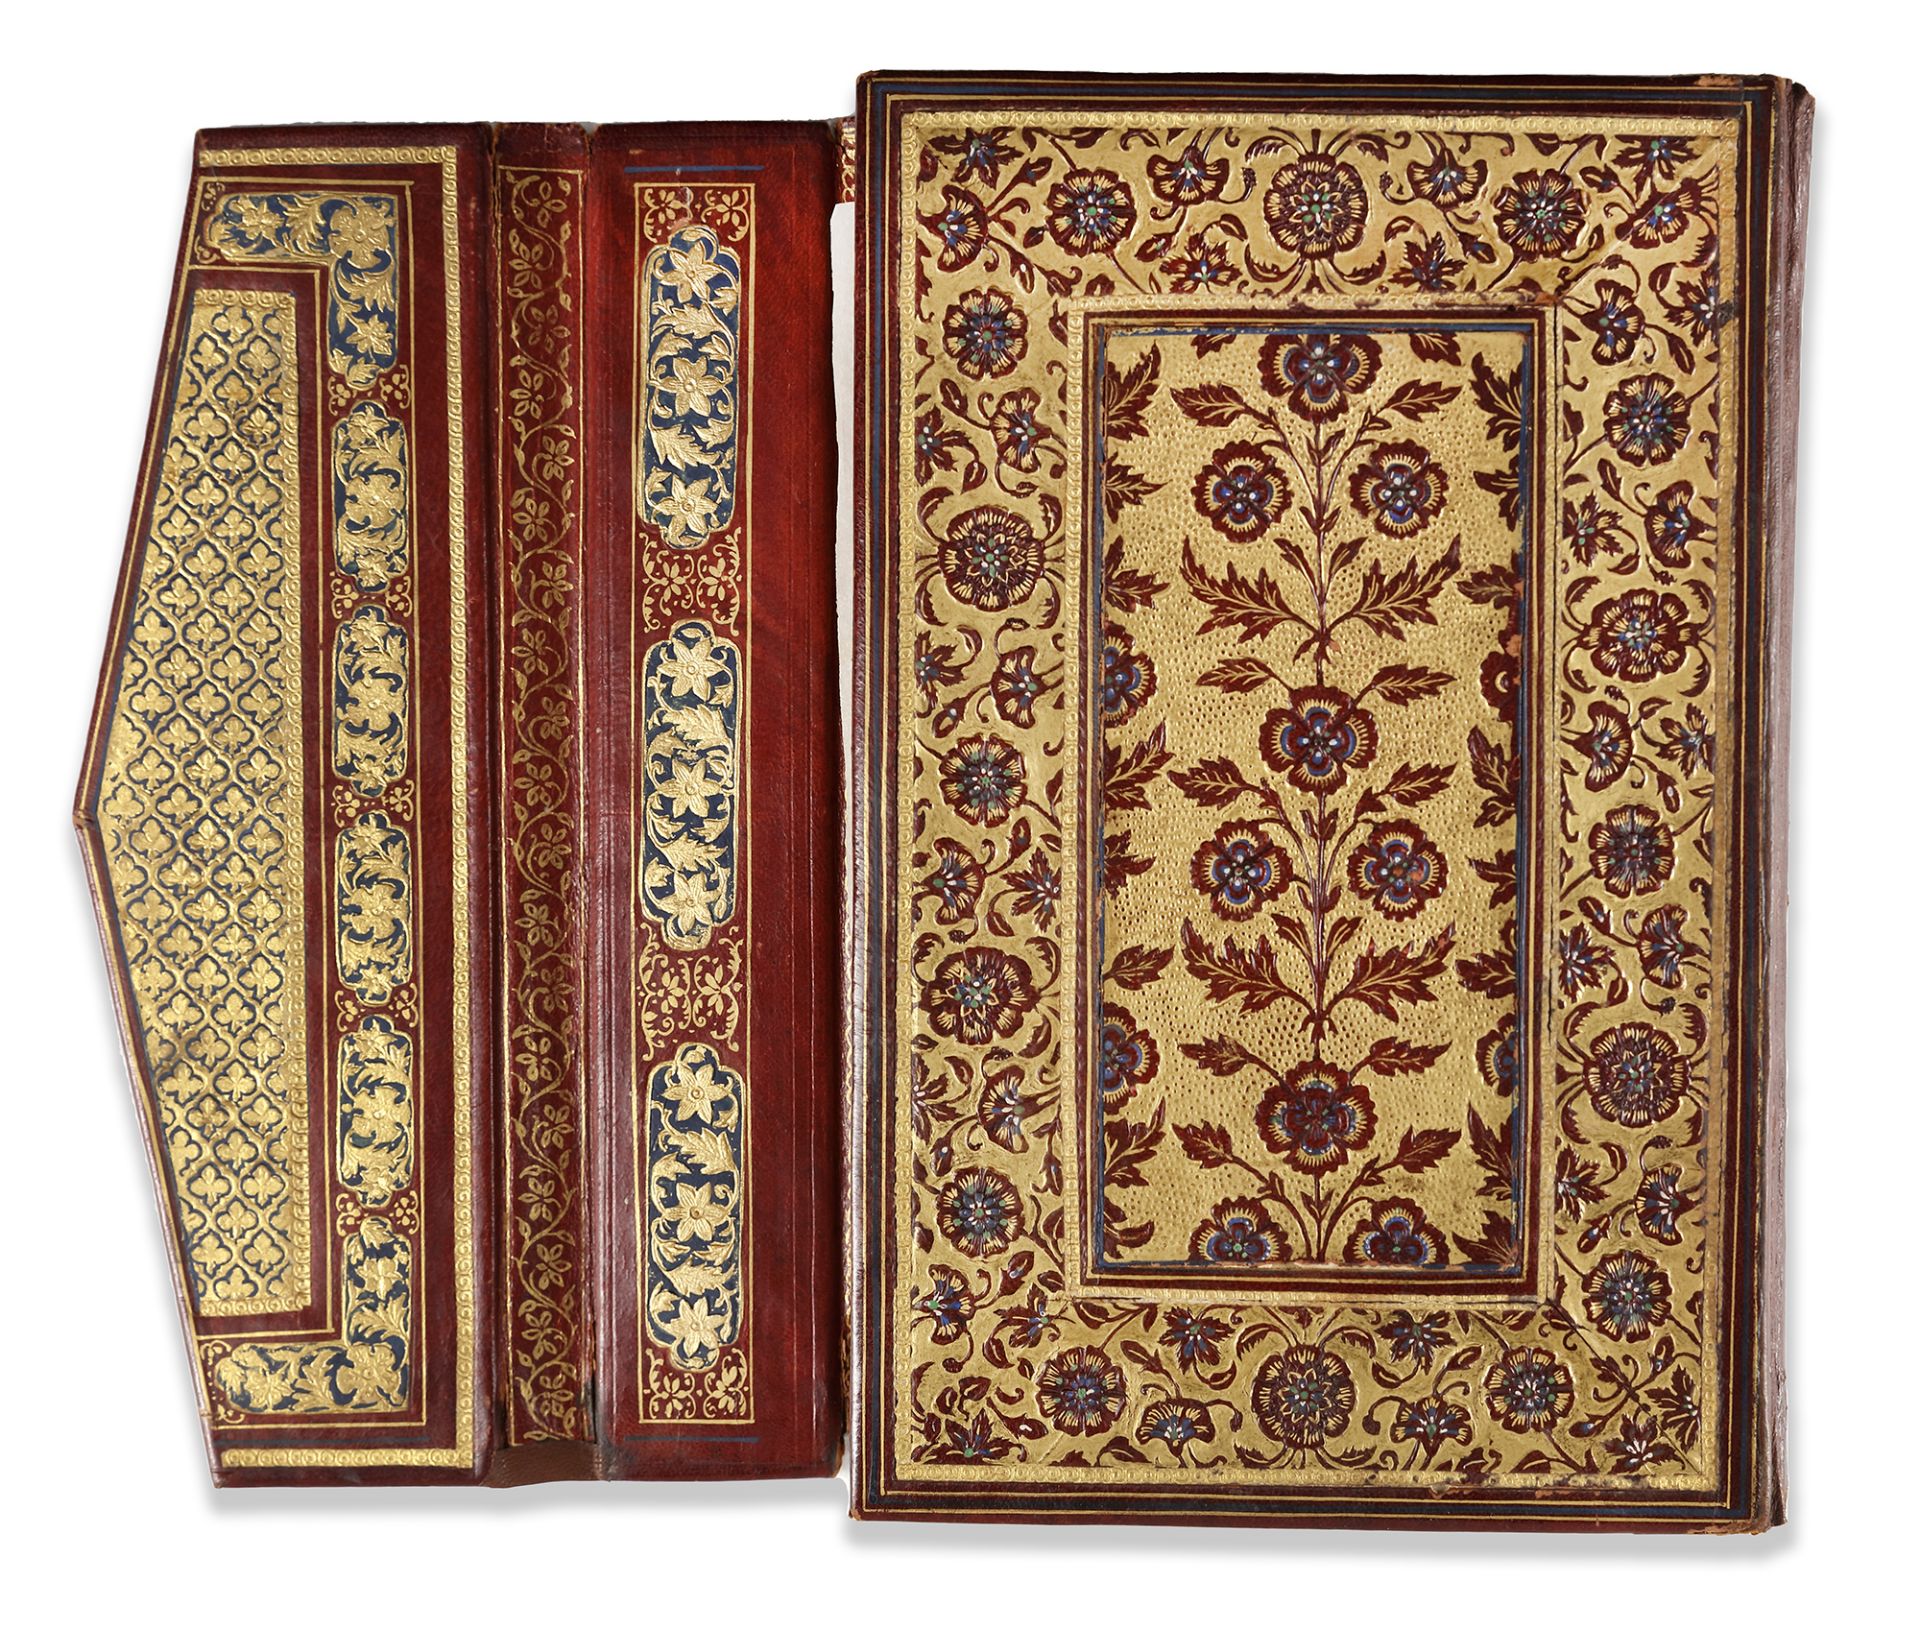 A FINELY ILLUMINATED QURAN, CENTRAL ASIA, 18TH CENTURY - Image 7 of 8